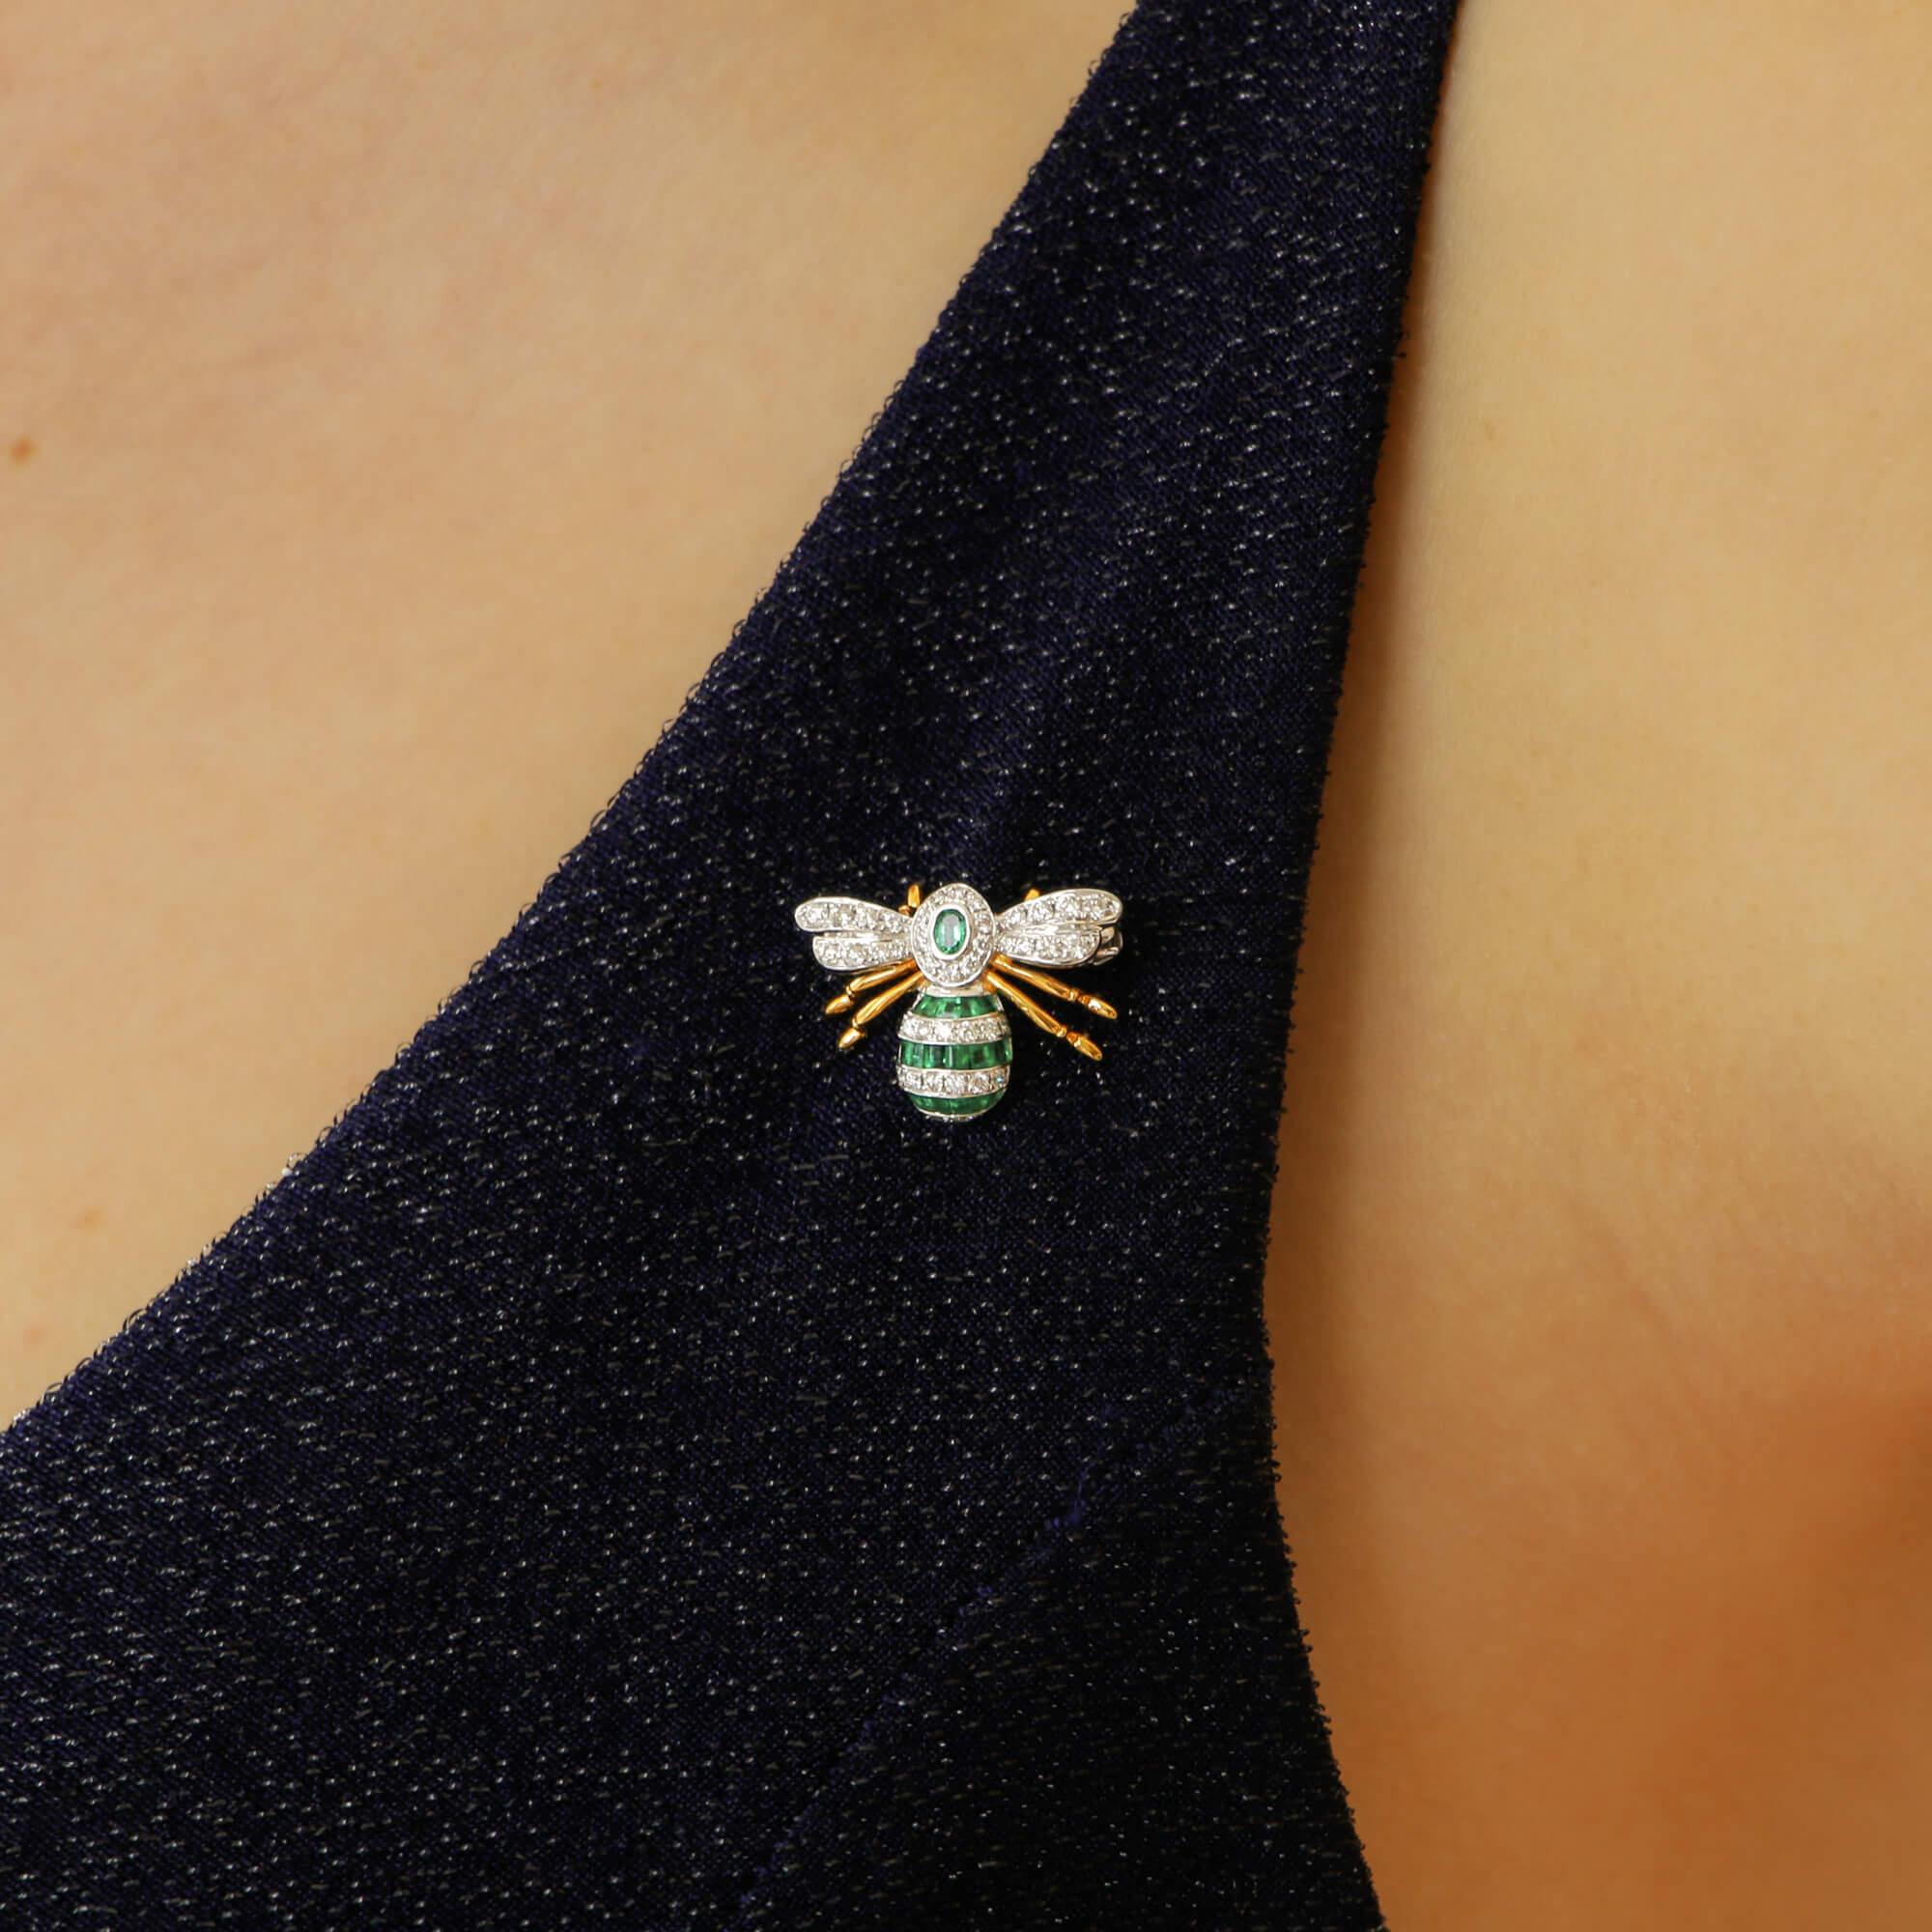 A beautiful handcrafted emerald and diamond bee brooch in 18 karat white and yellow gold. 

The bee’s thorax is composed of a rubover-set oval emerald within a halo of grain-set round brilliant-cut diamonds, the wings pave-set throughout with